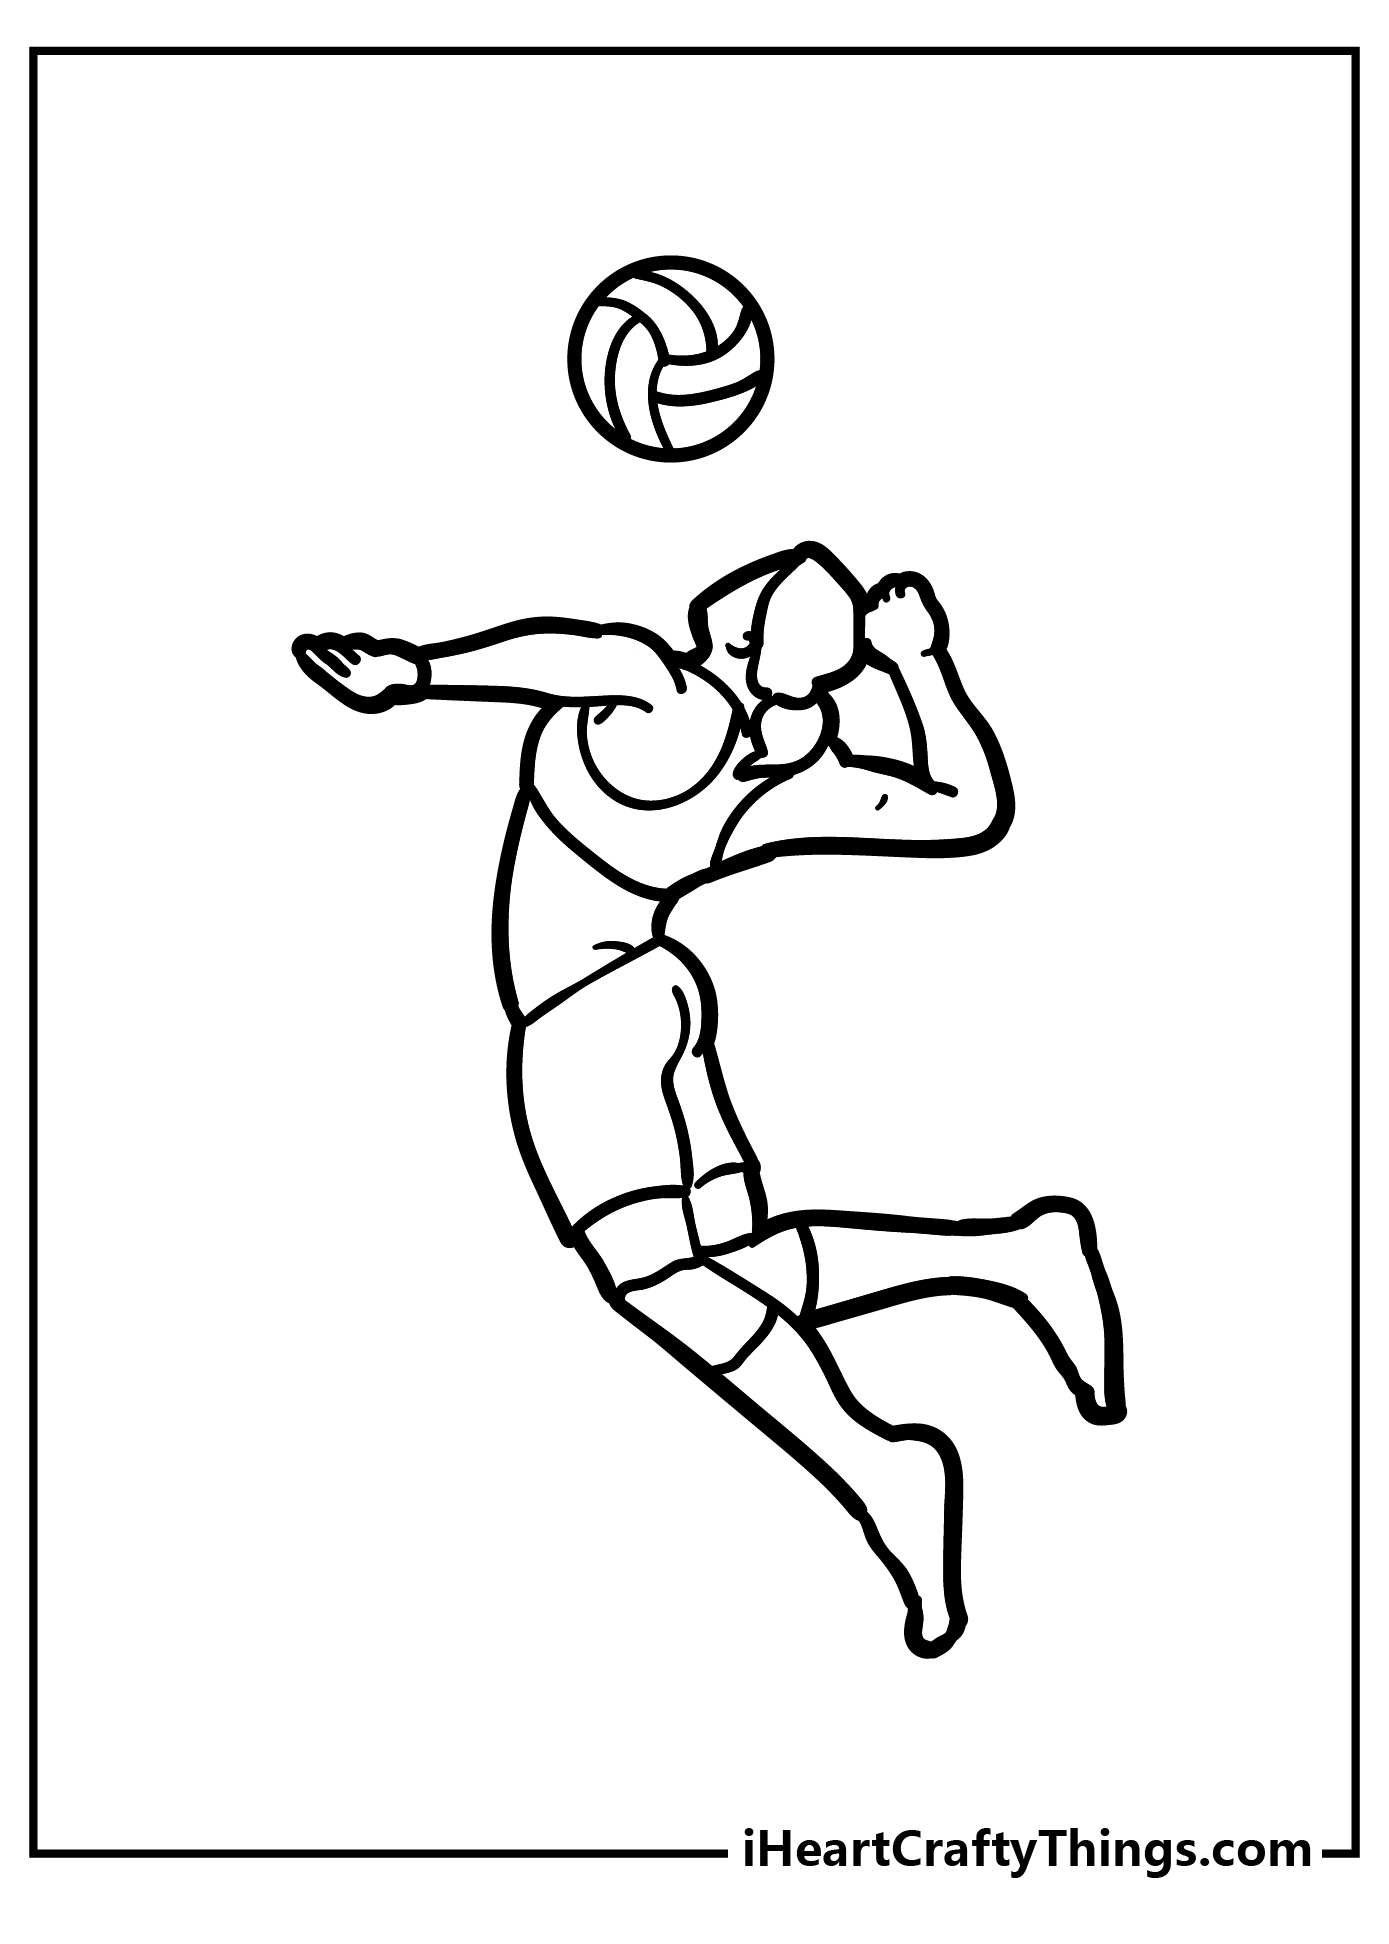 Volleyball Coloring Pages free pdf download